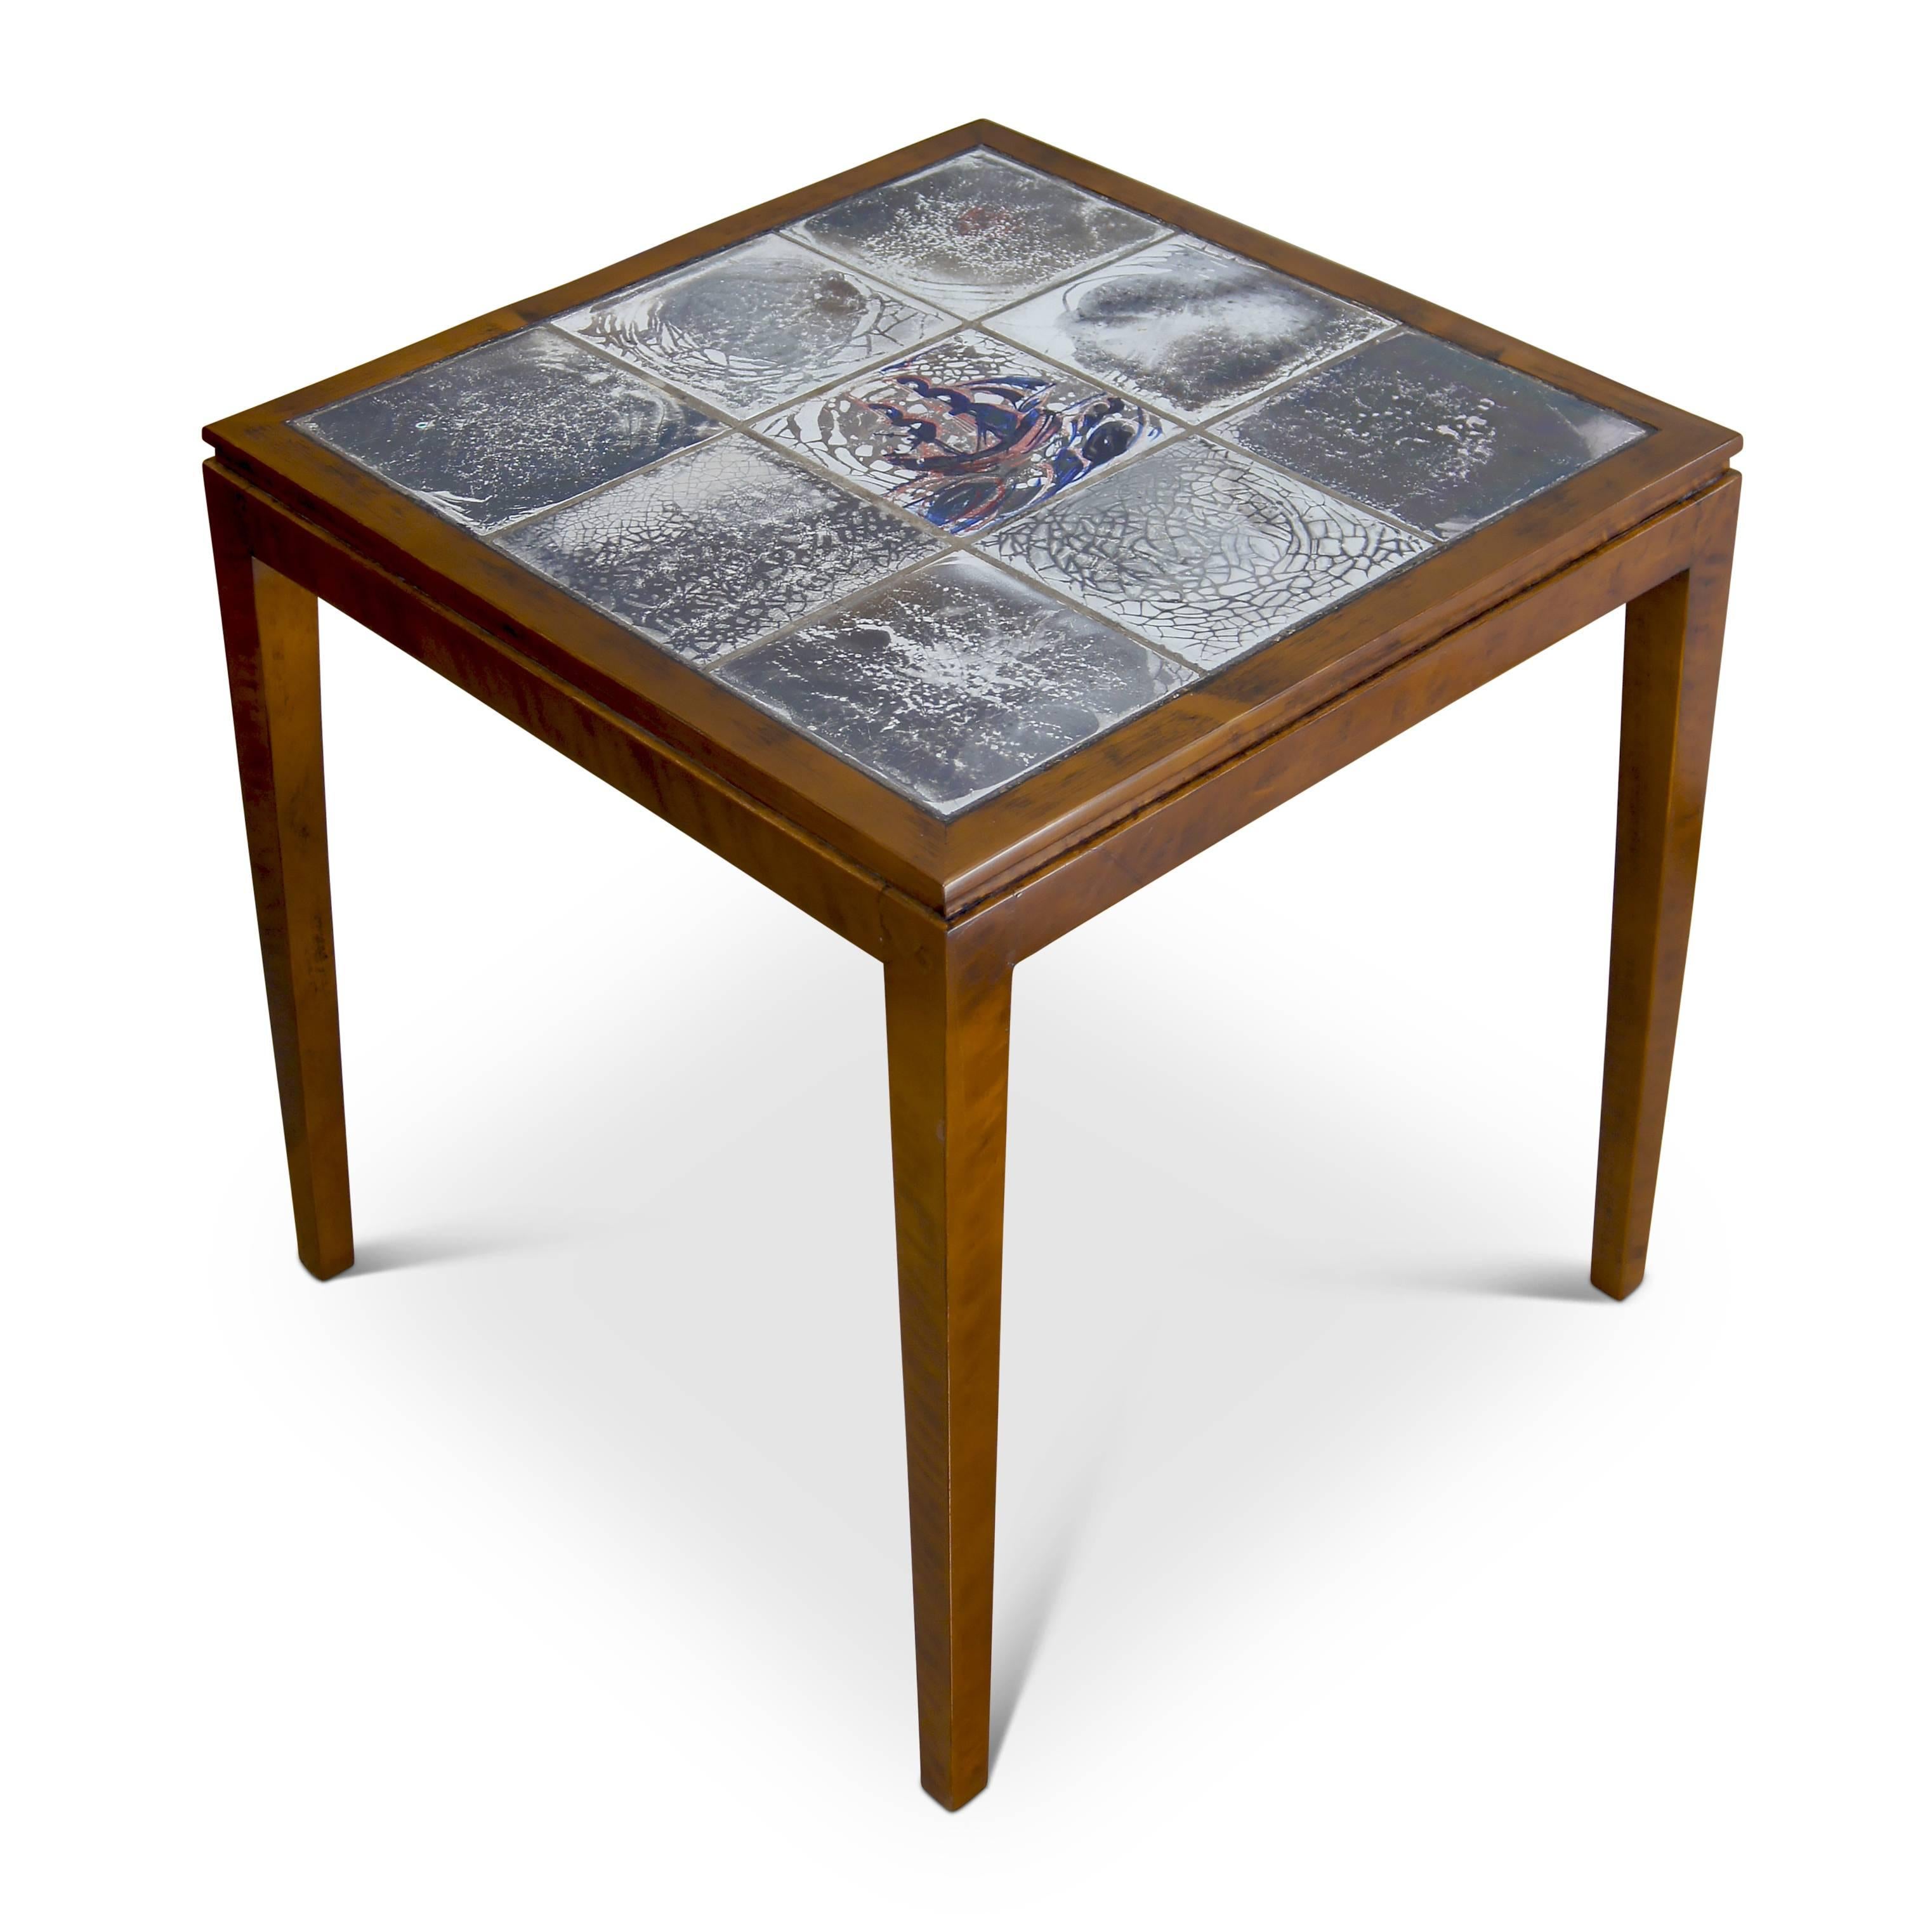 Occasional table designed and executed by Frits Henningsen, with square top and four tapered legs in beech, and having a very handsome inset tile top with atmospheric craquelure luster glazes and central ship motif designed and painted by Jens